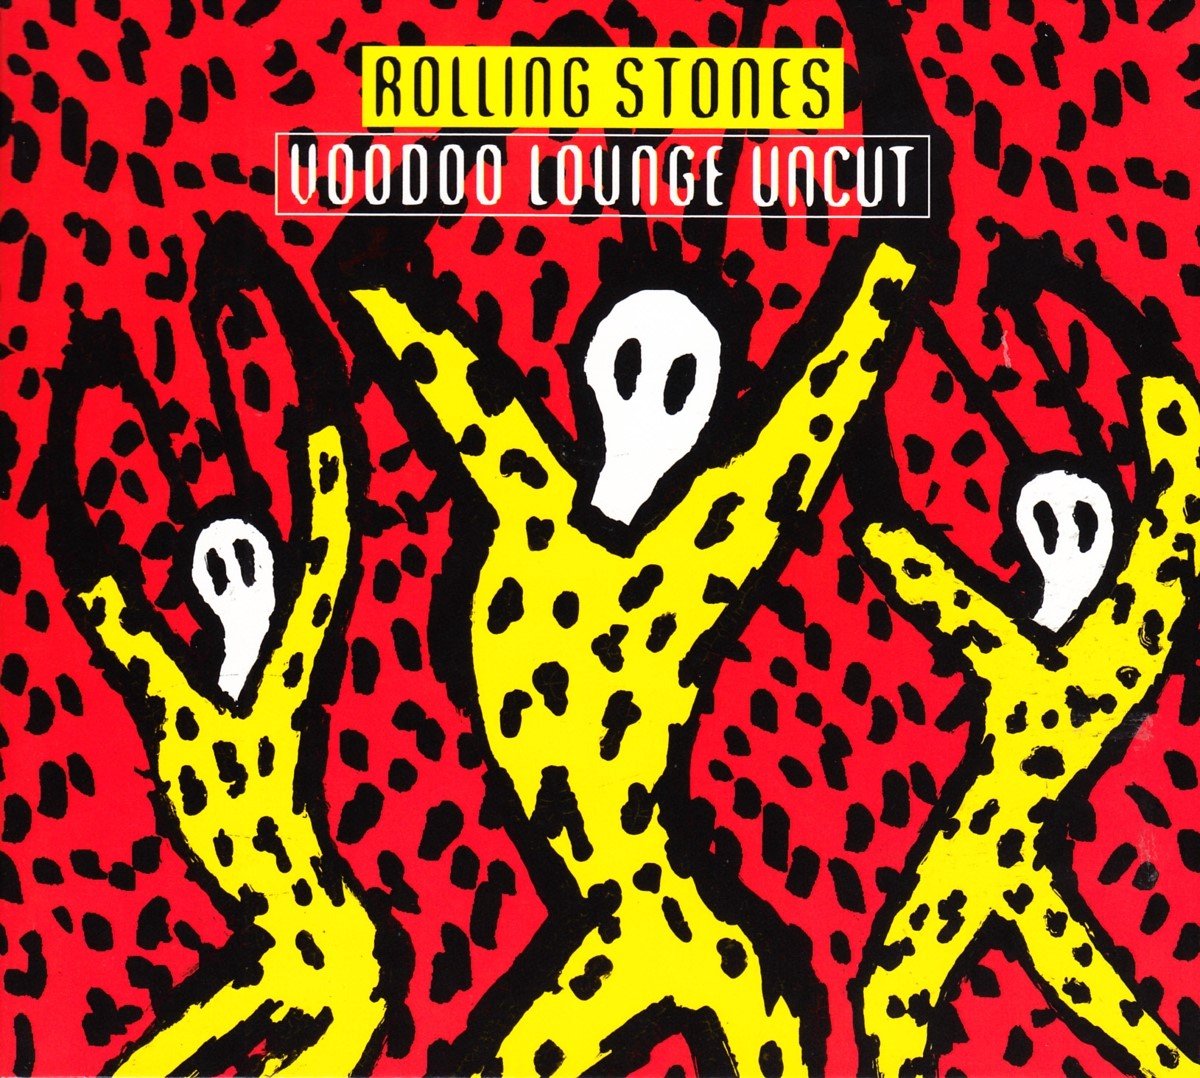 The Rolling Stones - Voodoo Lounge Uncut (Live) (Blu-Ray | 2 CD) - The Rolling Stones